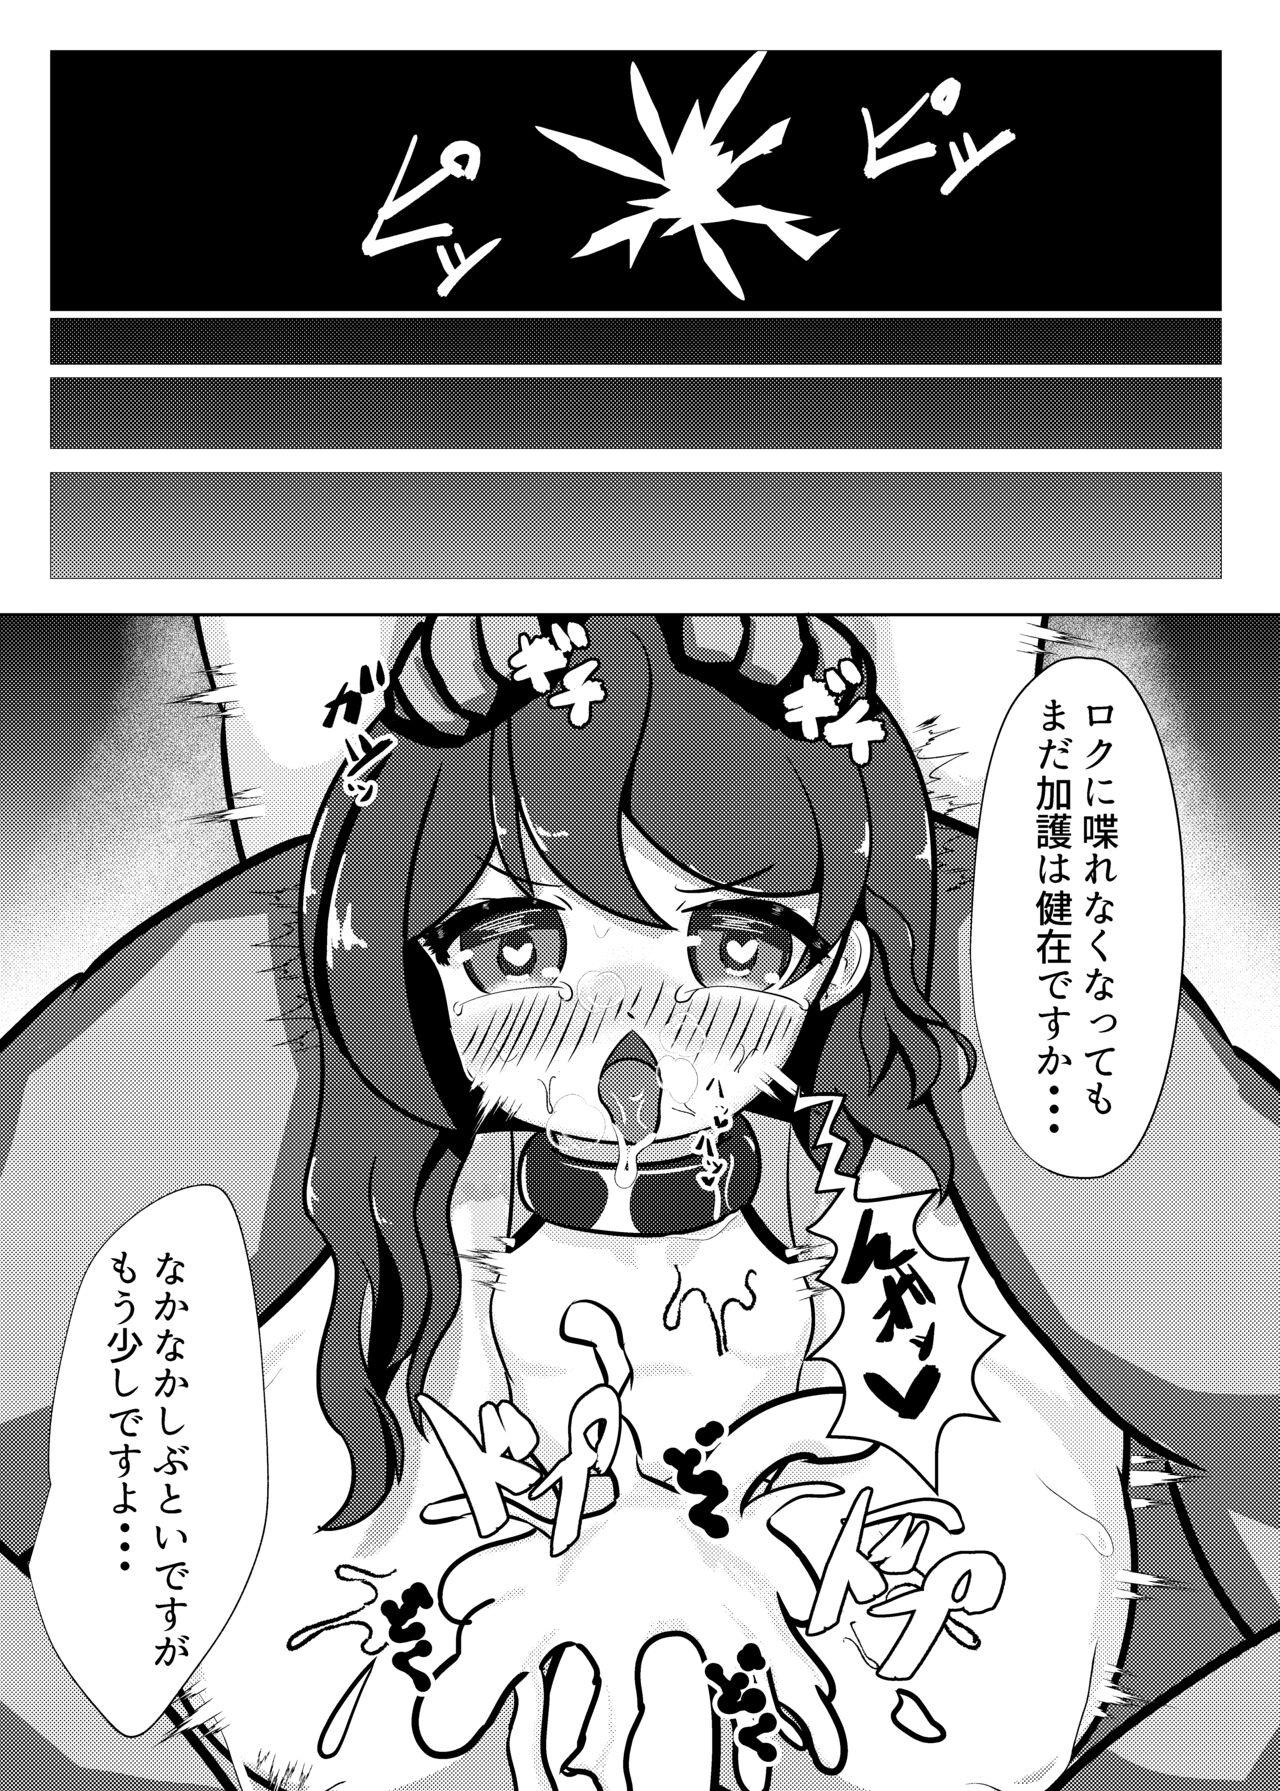 Bigtits ヒギリちゃんがひどいめにあう本 蟲教強制改宗悪堕ち編 - Flower knight girl Screaming - Page 11